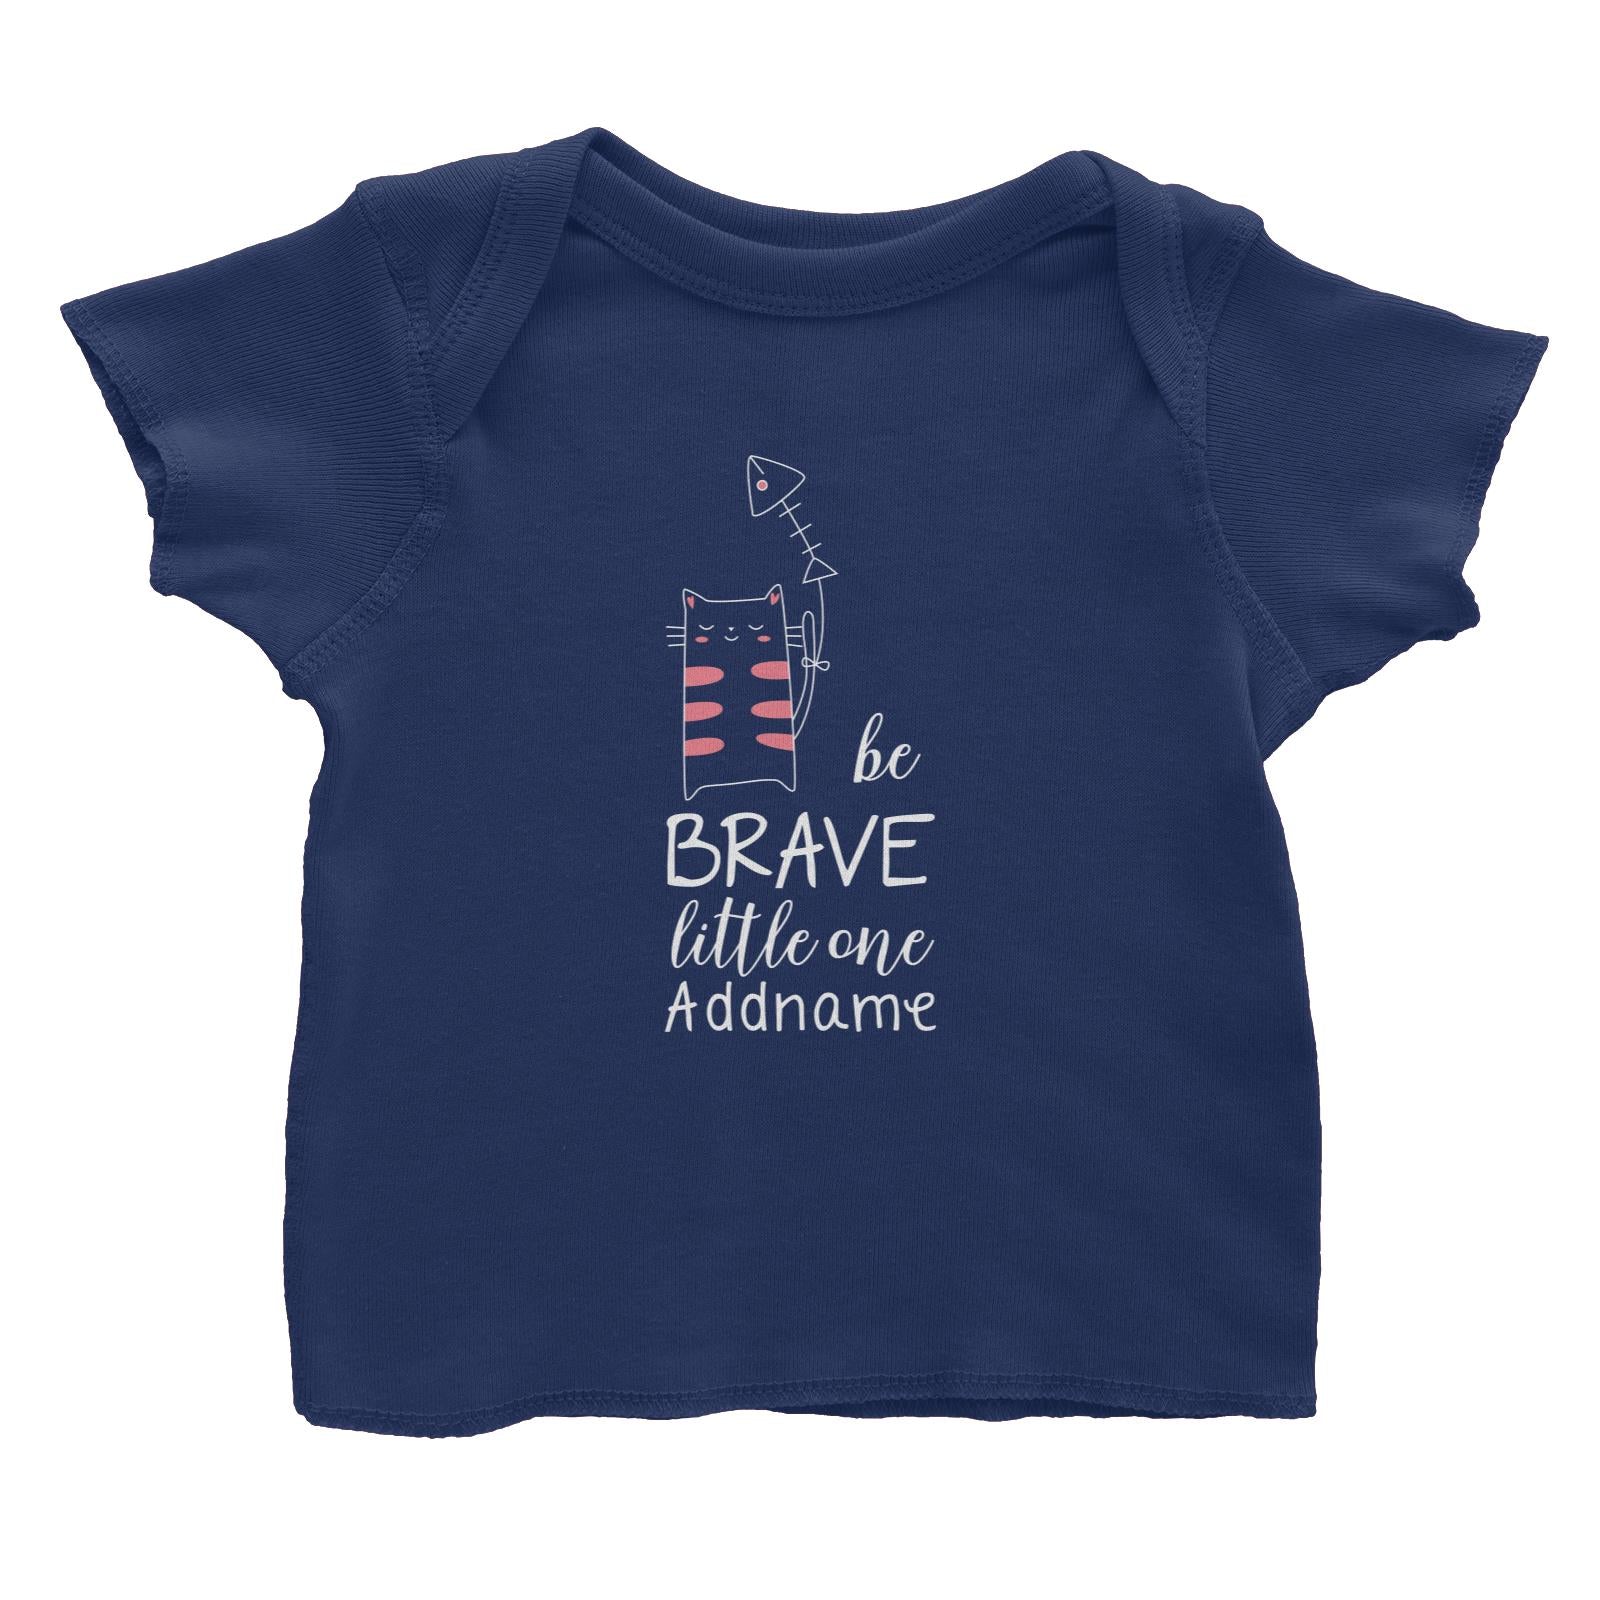 Cute Animals and Friends Series 2 Cat Be Brave Little One Addname Baby T-Shirt